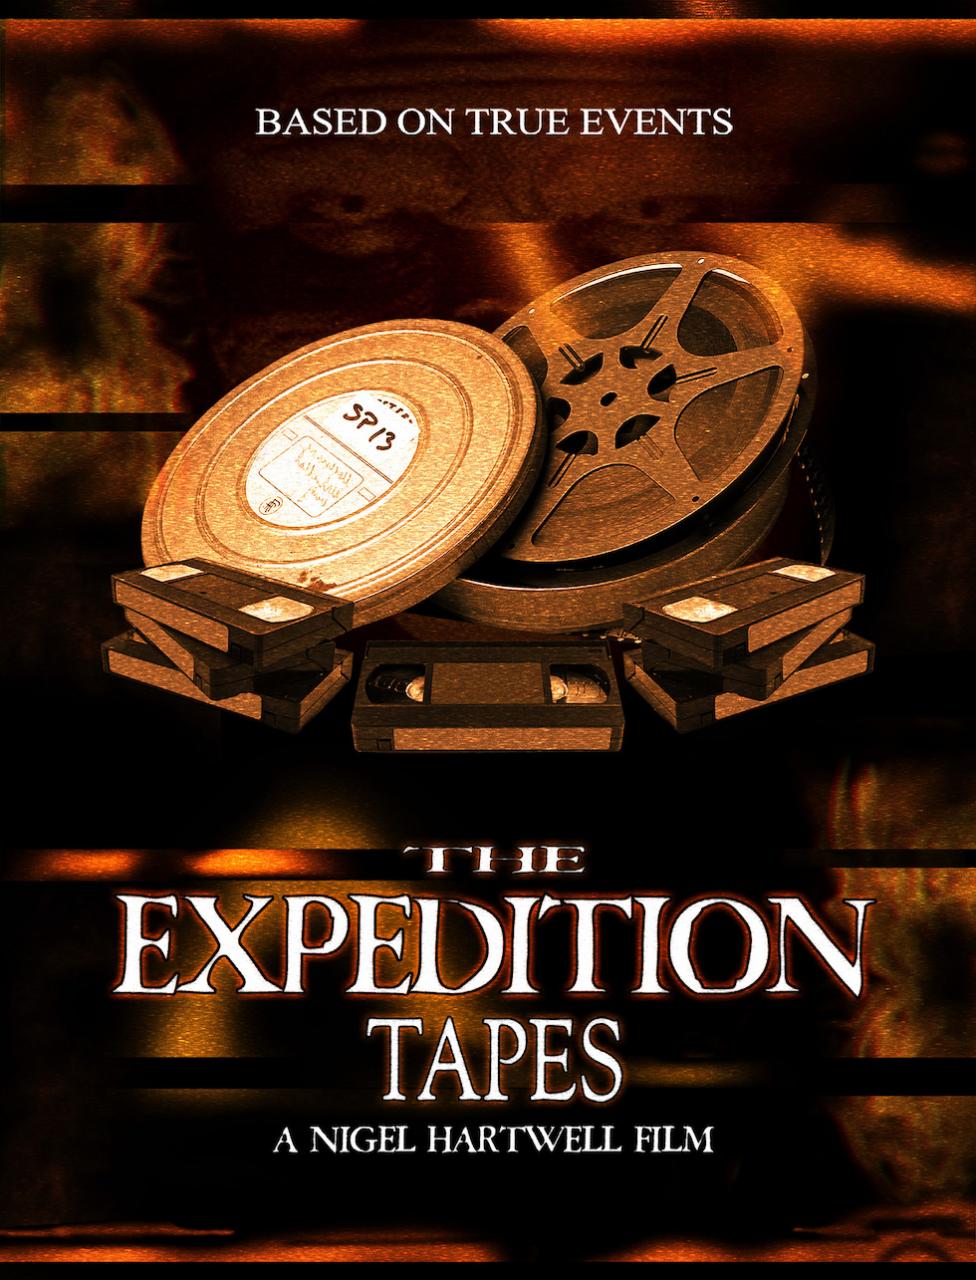 The Expedition Tapes